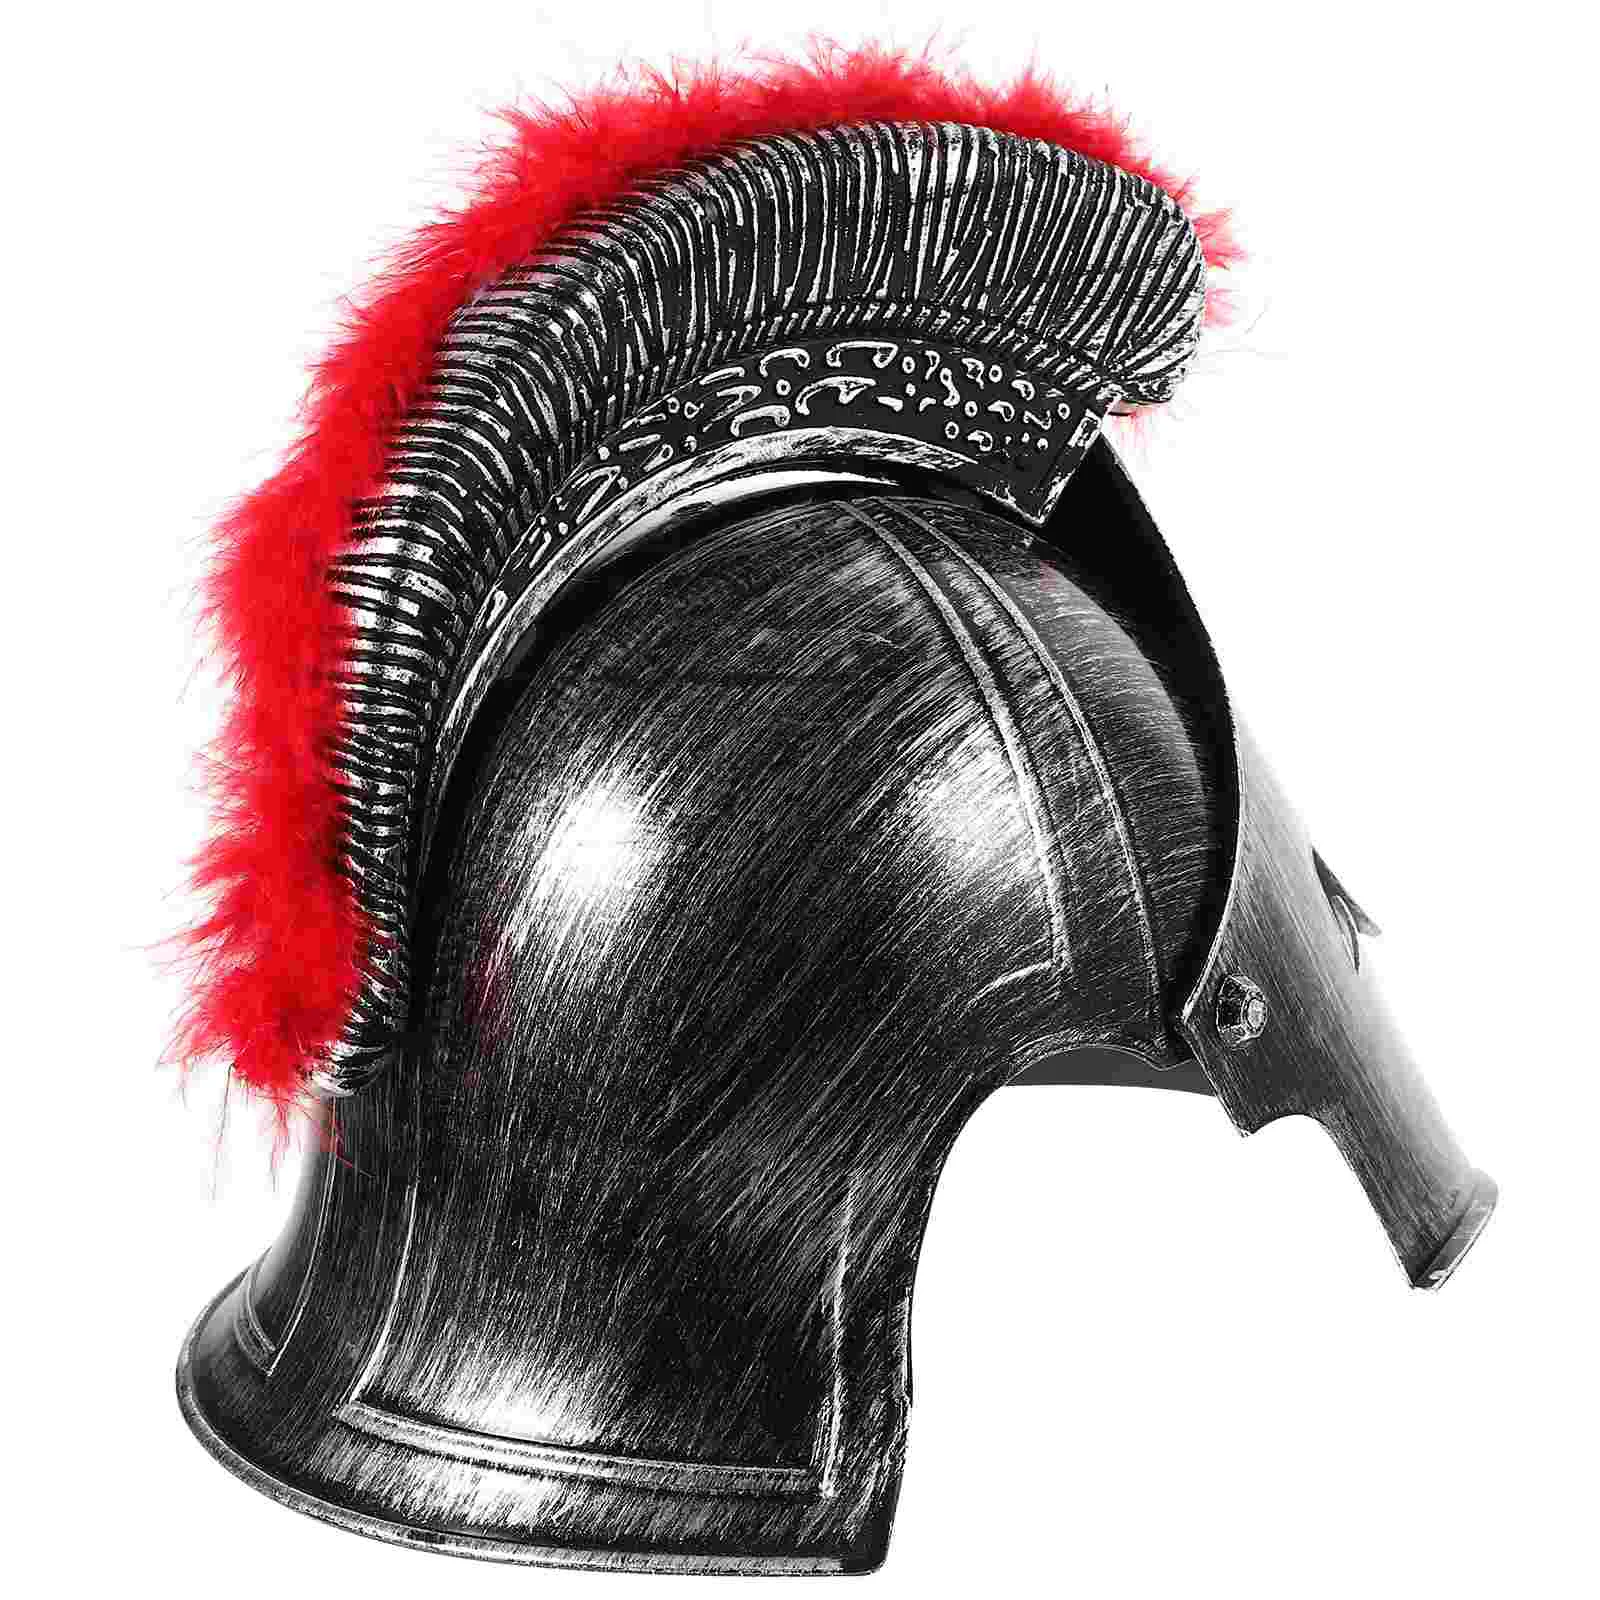 

Adults Soldier Men Gladiator Costume Medieval Times Clothing Man Pvc Plastic Material Roman Hooey Hats